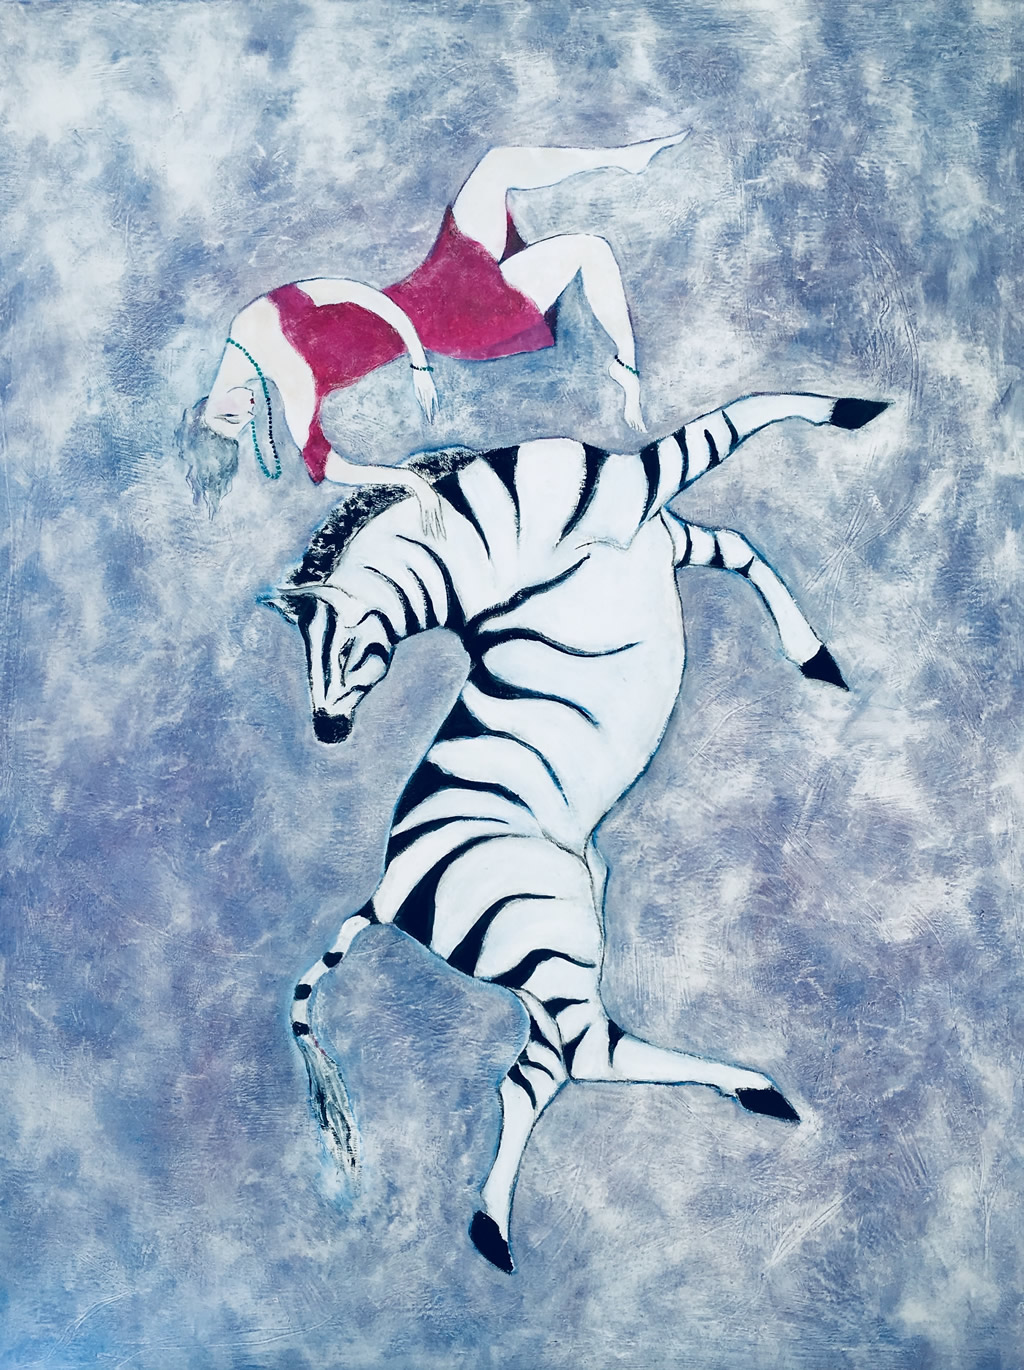 Astral travel with zebra